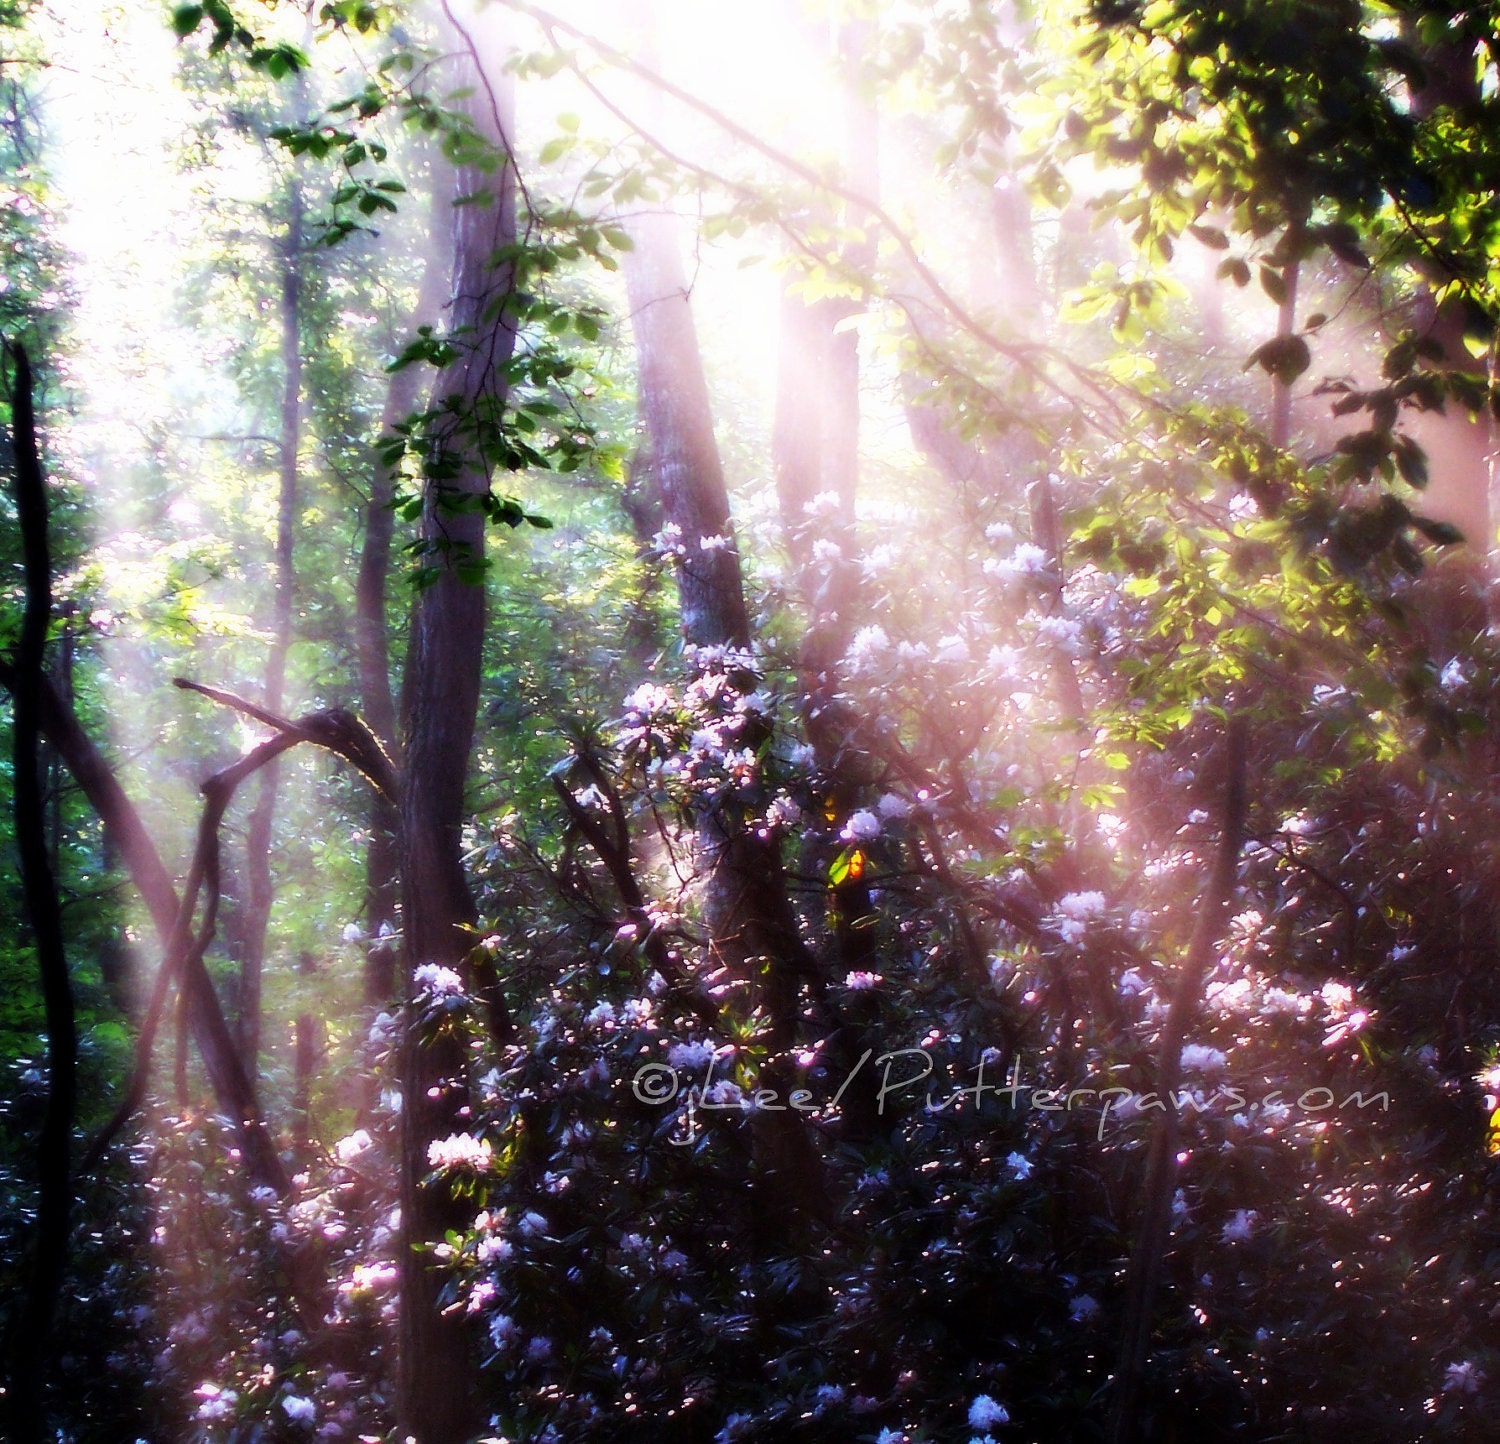 Wooded Morning Sun Rays on Rhodedendrons Foggy Walk in the forest mystical Photograph 5x7 - Putterpaws